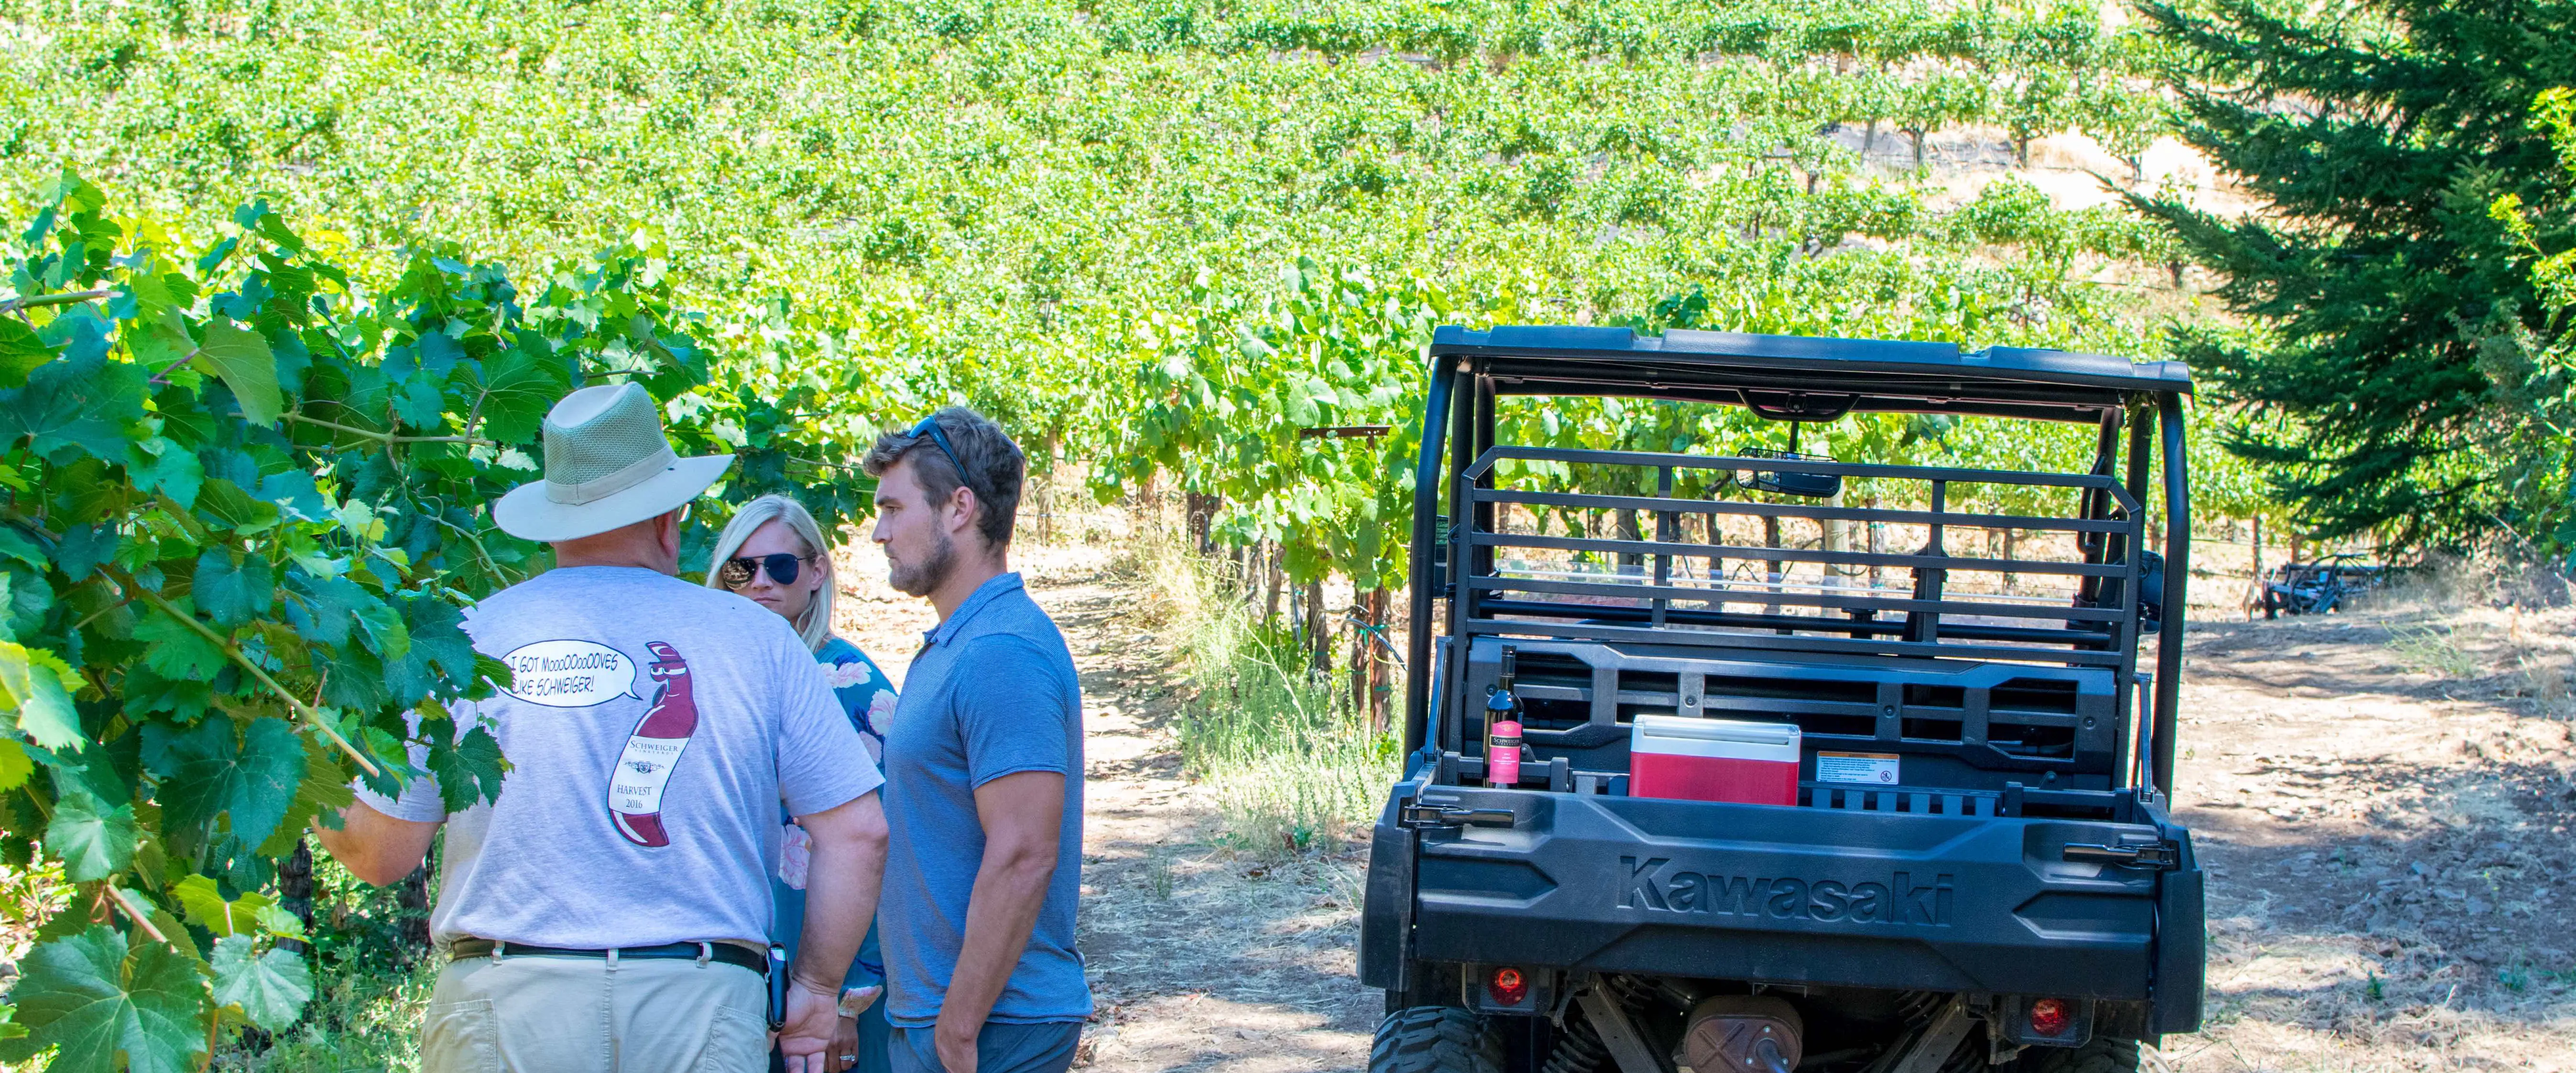 Wine Tour with Napa Valley Winemaker